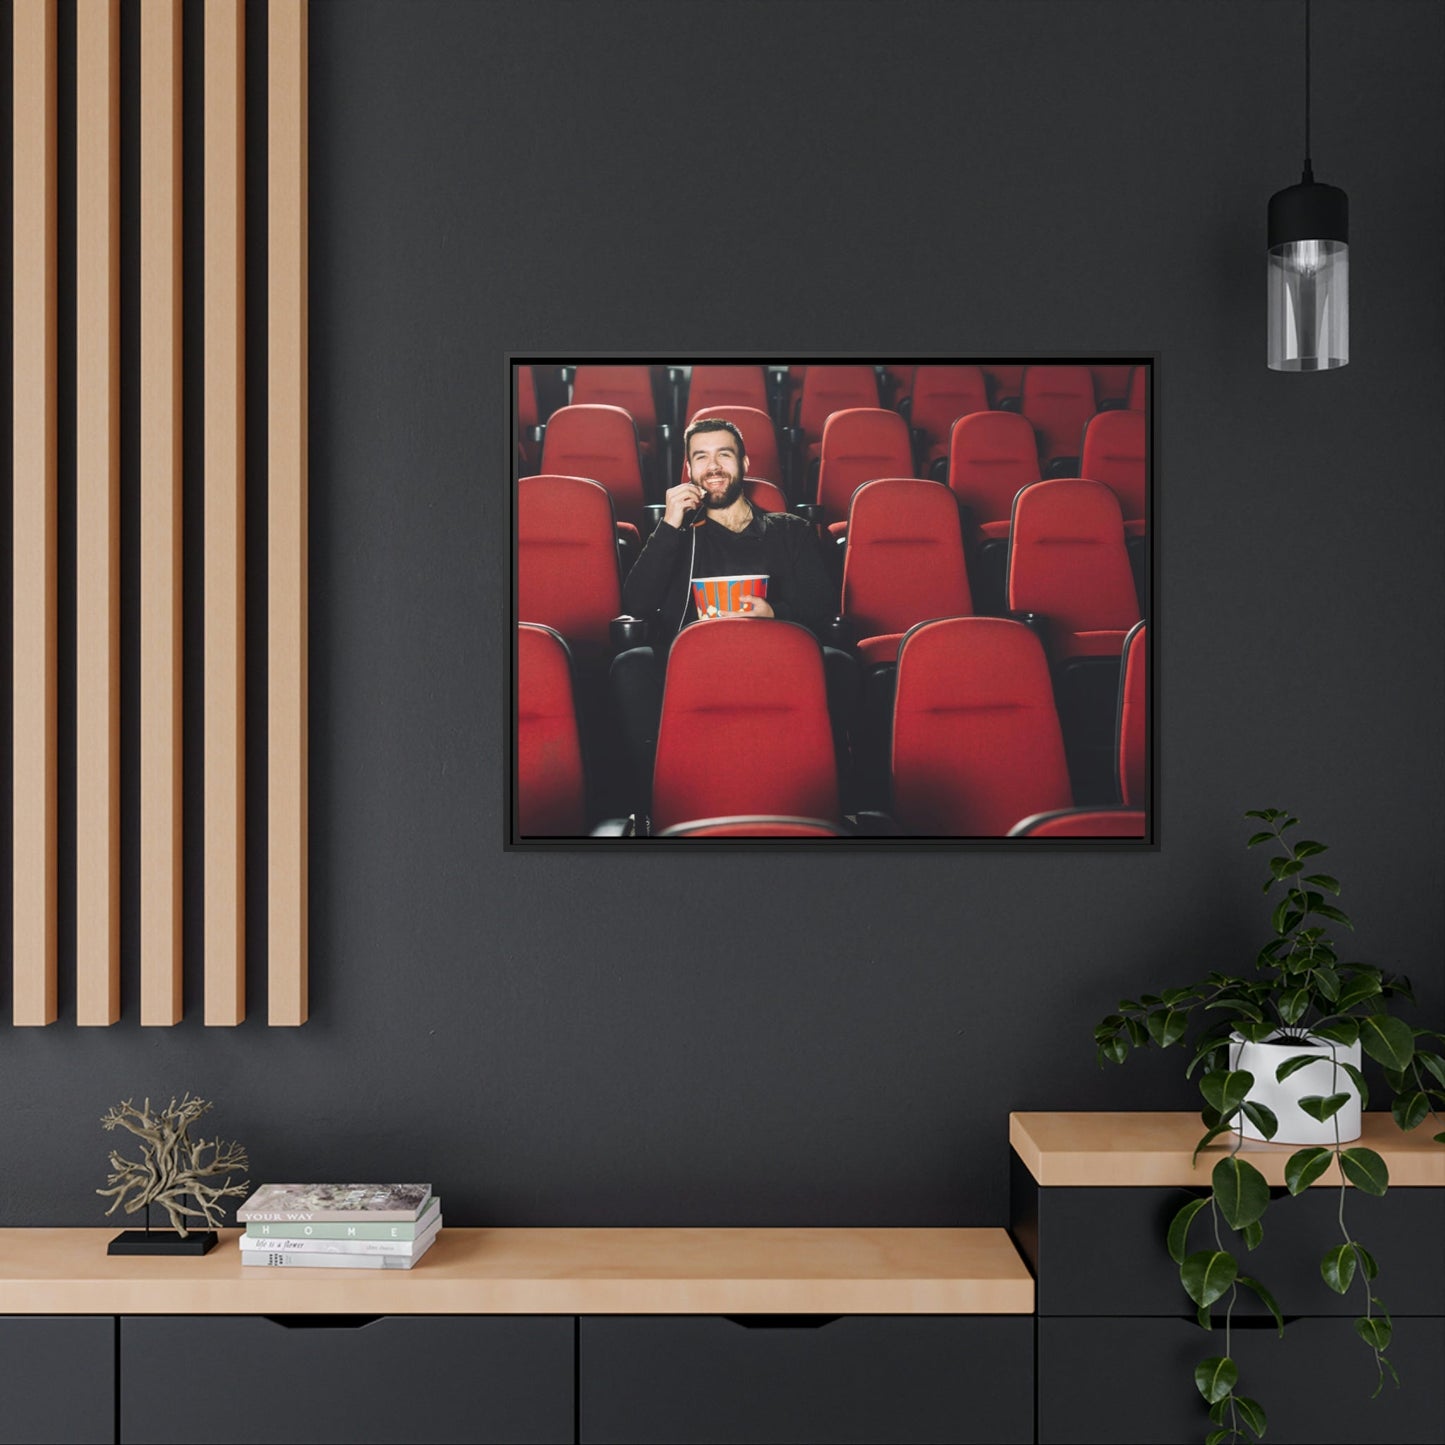 Comedy Club Chaos: A Hilarious Canvas Print of a Stand-Up Show